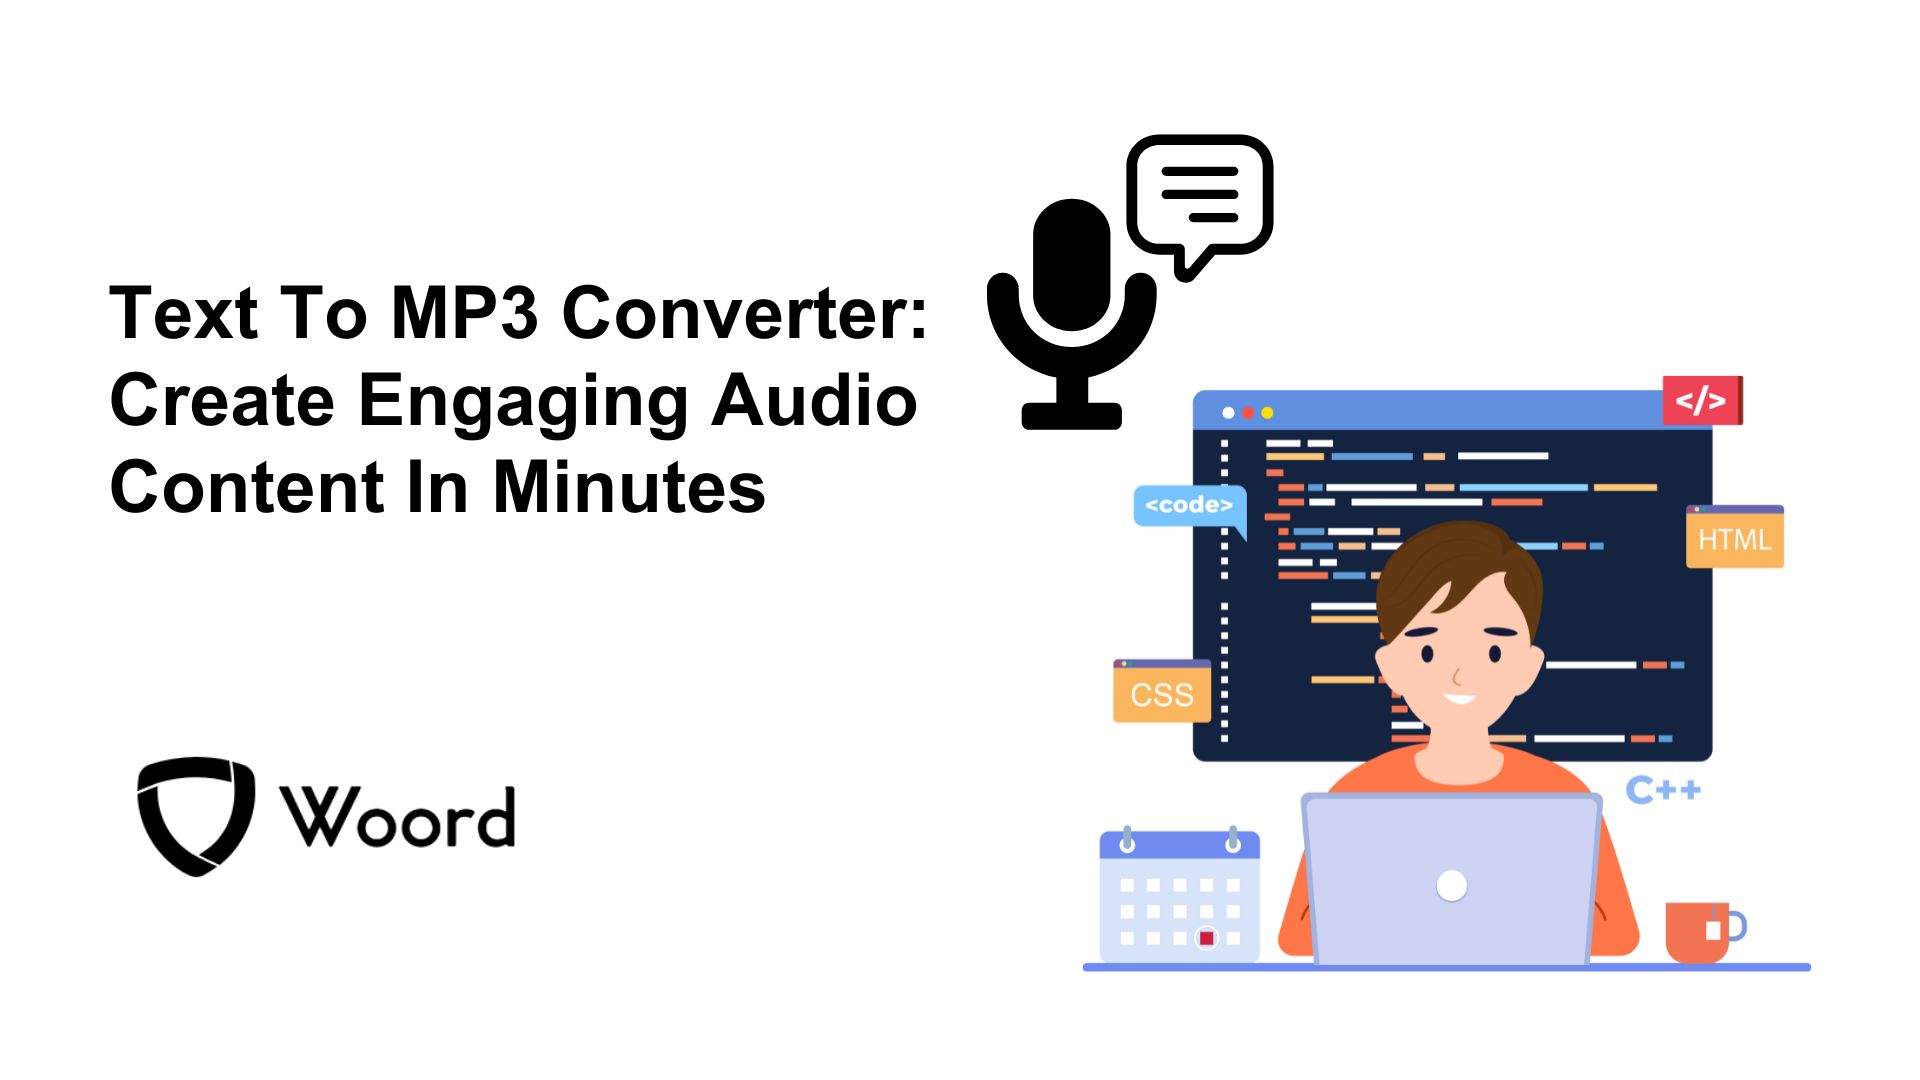 Text To MP3 Converter: Create Engaging Audio Content In Minutes